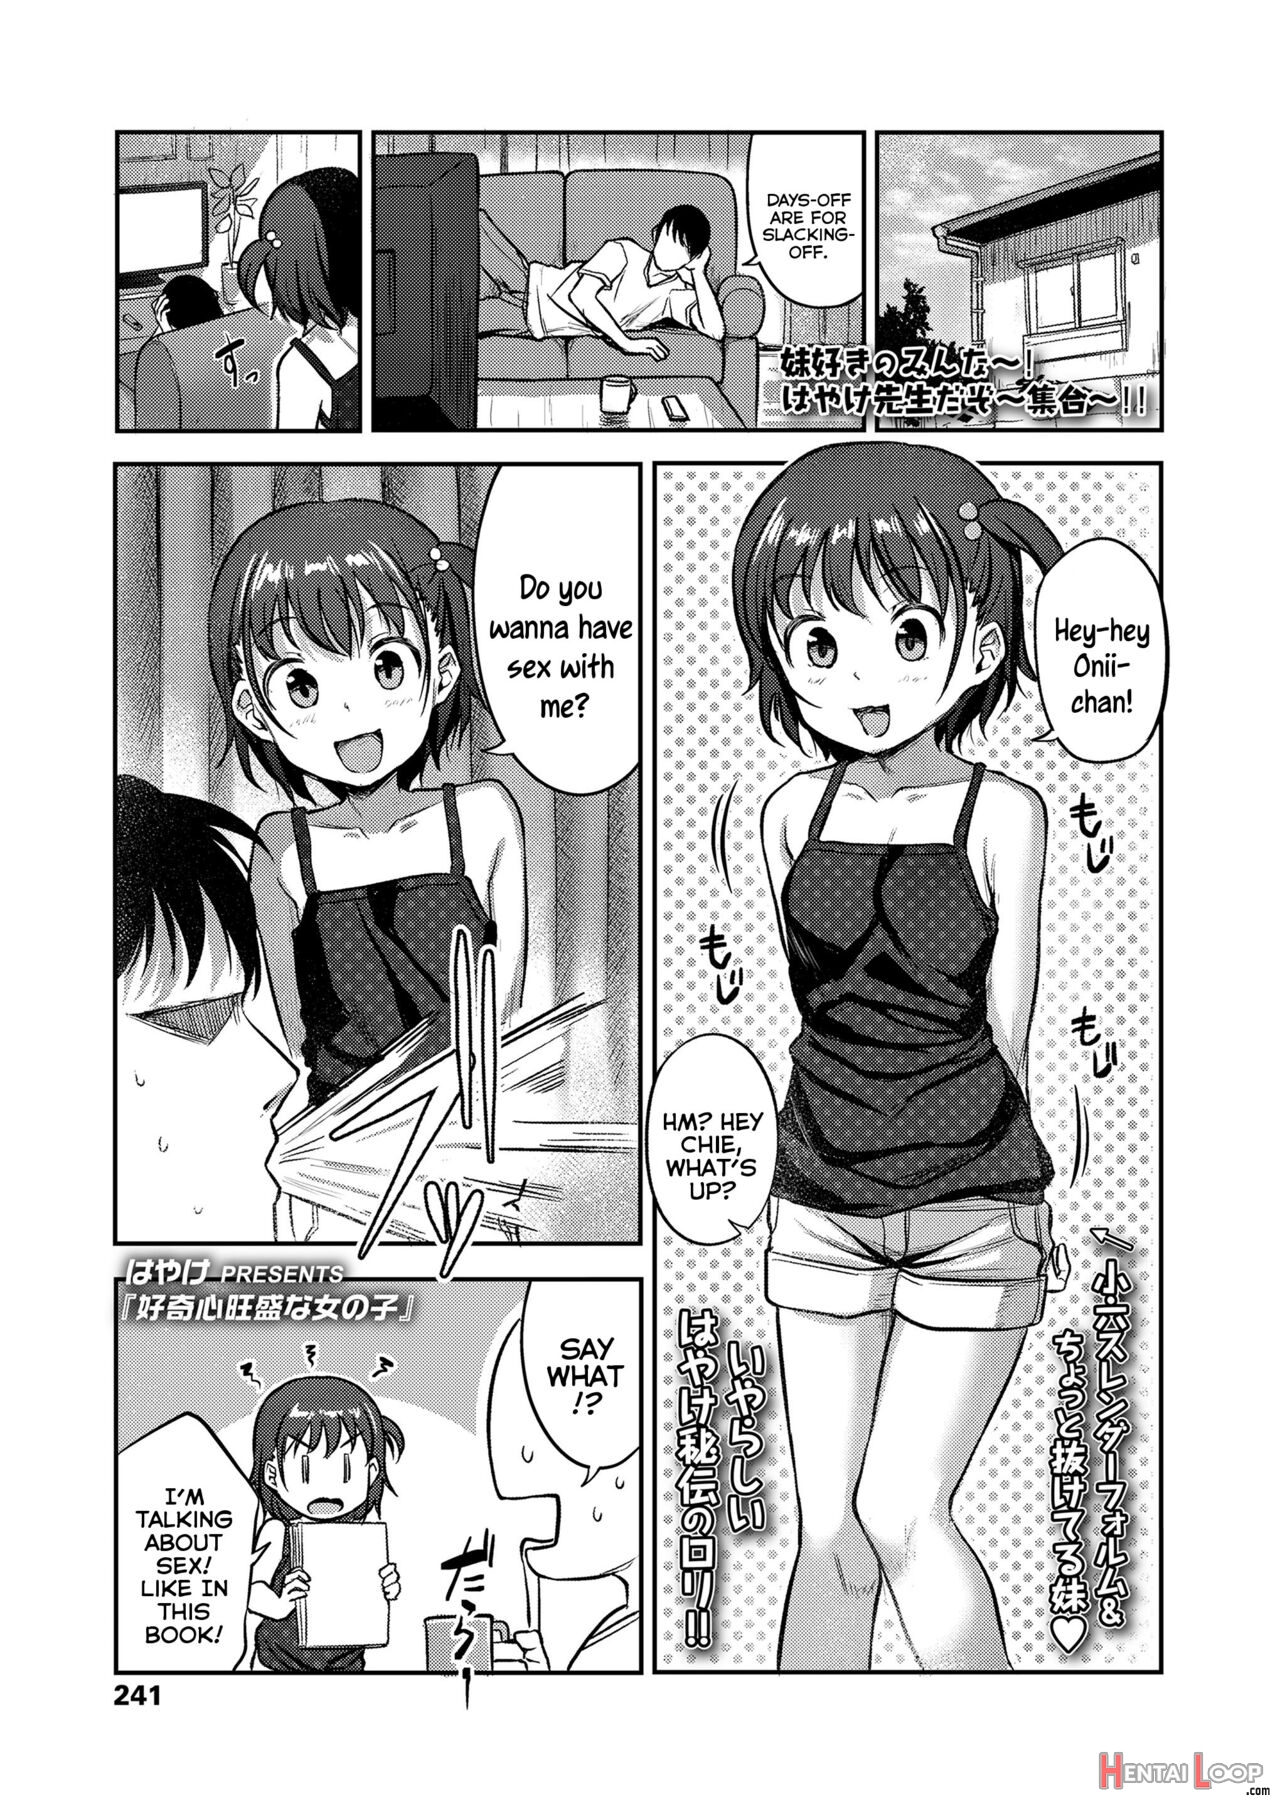 A Young Girl Brimming With Curiousity page 1